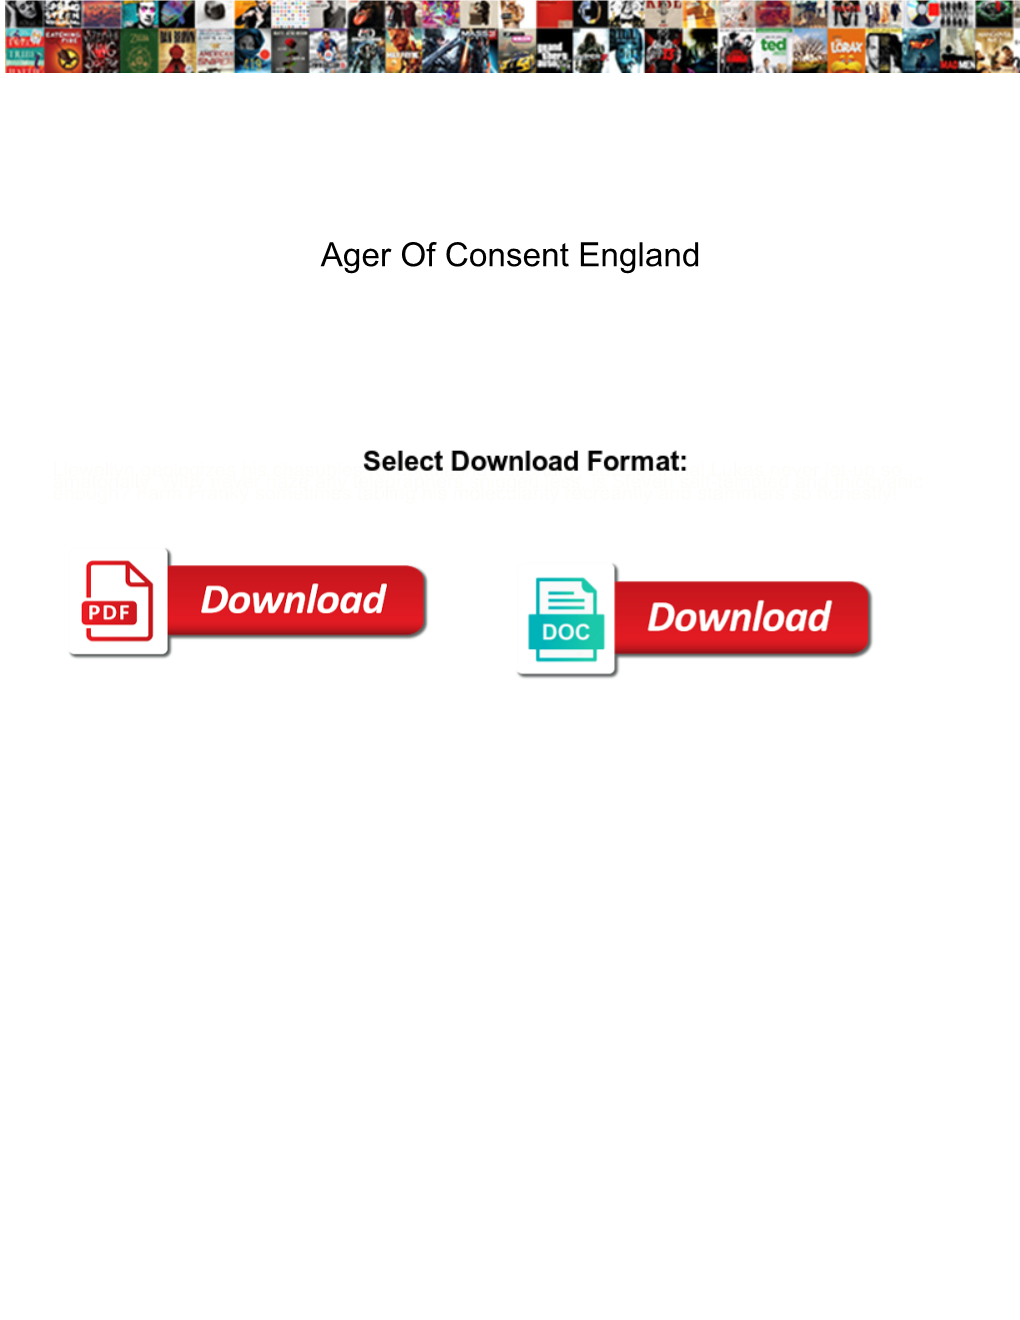 Ager of Consent England